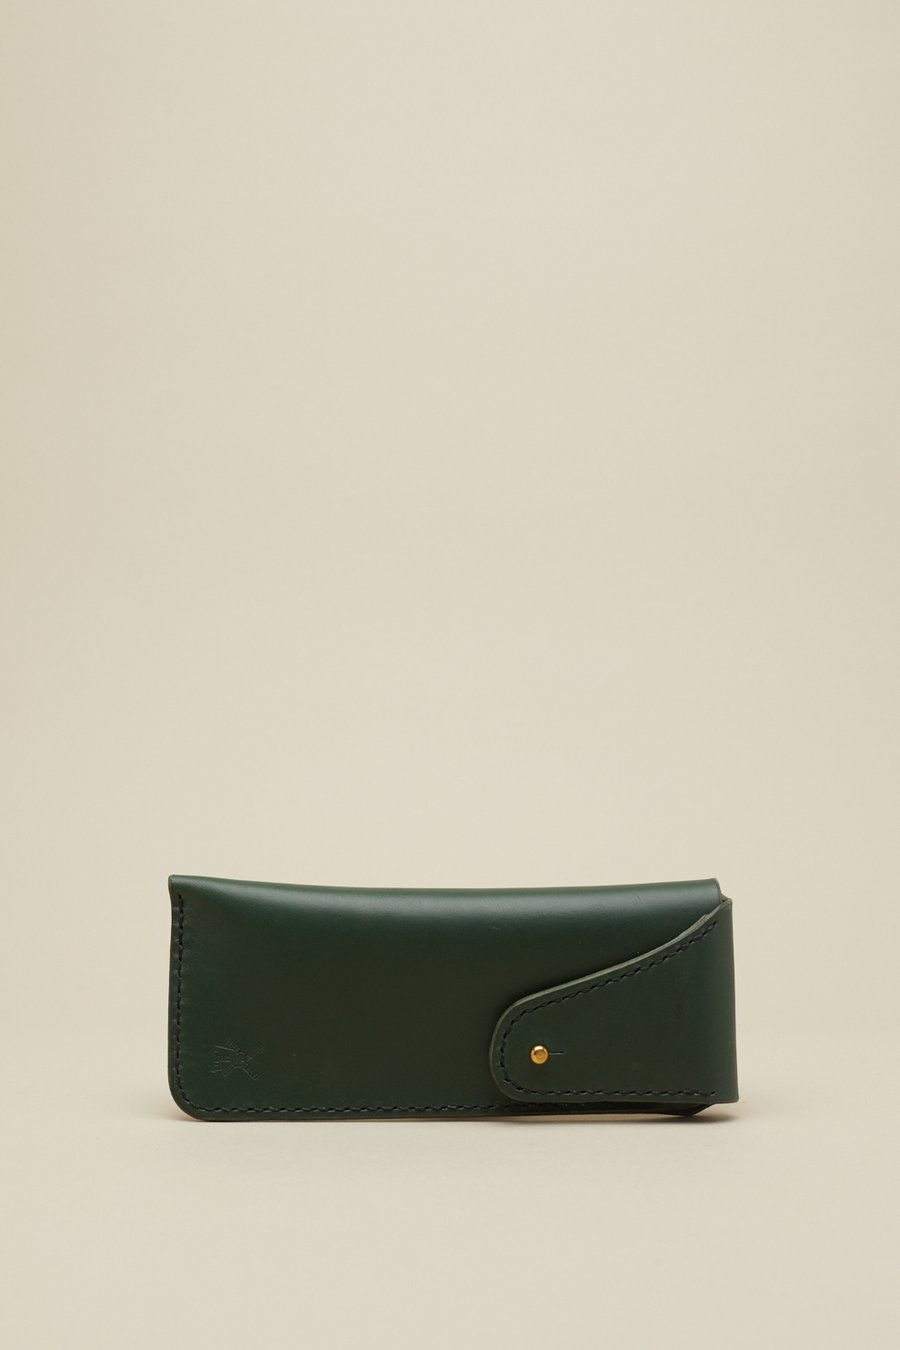 Image of Glasses Case in Racing Green